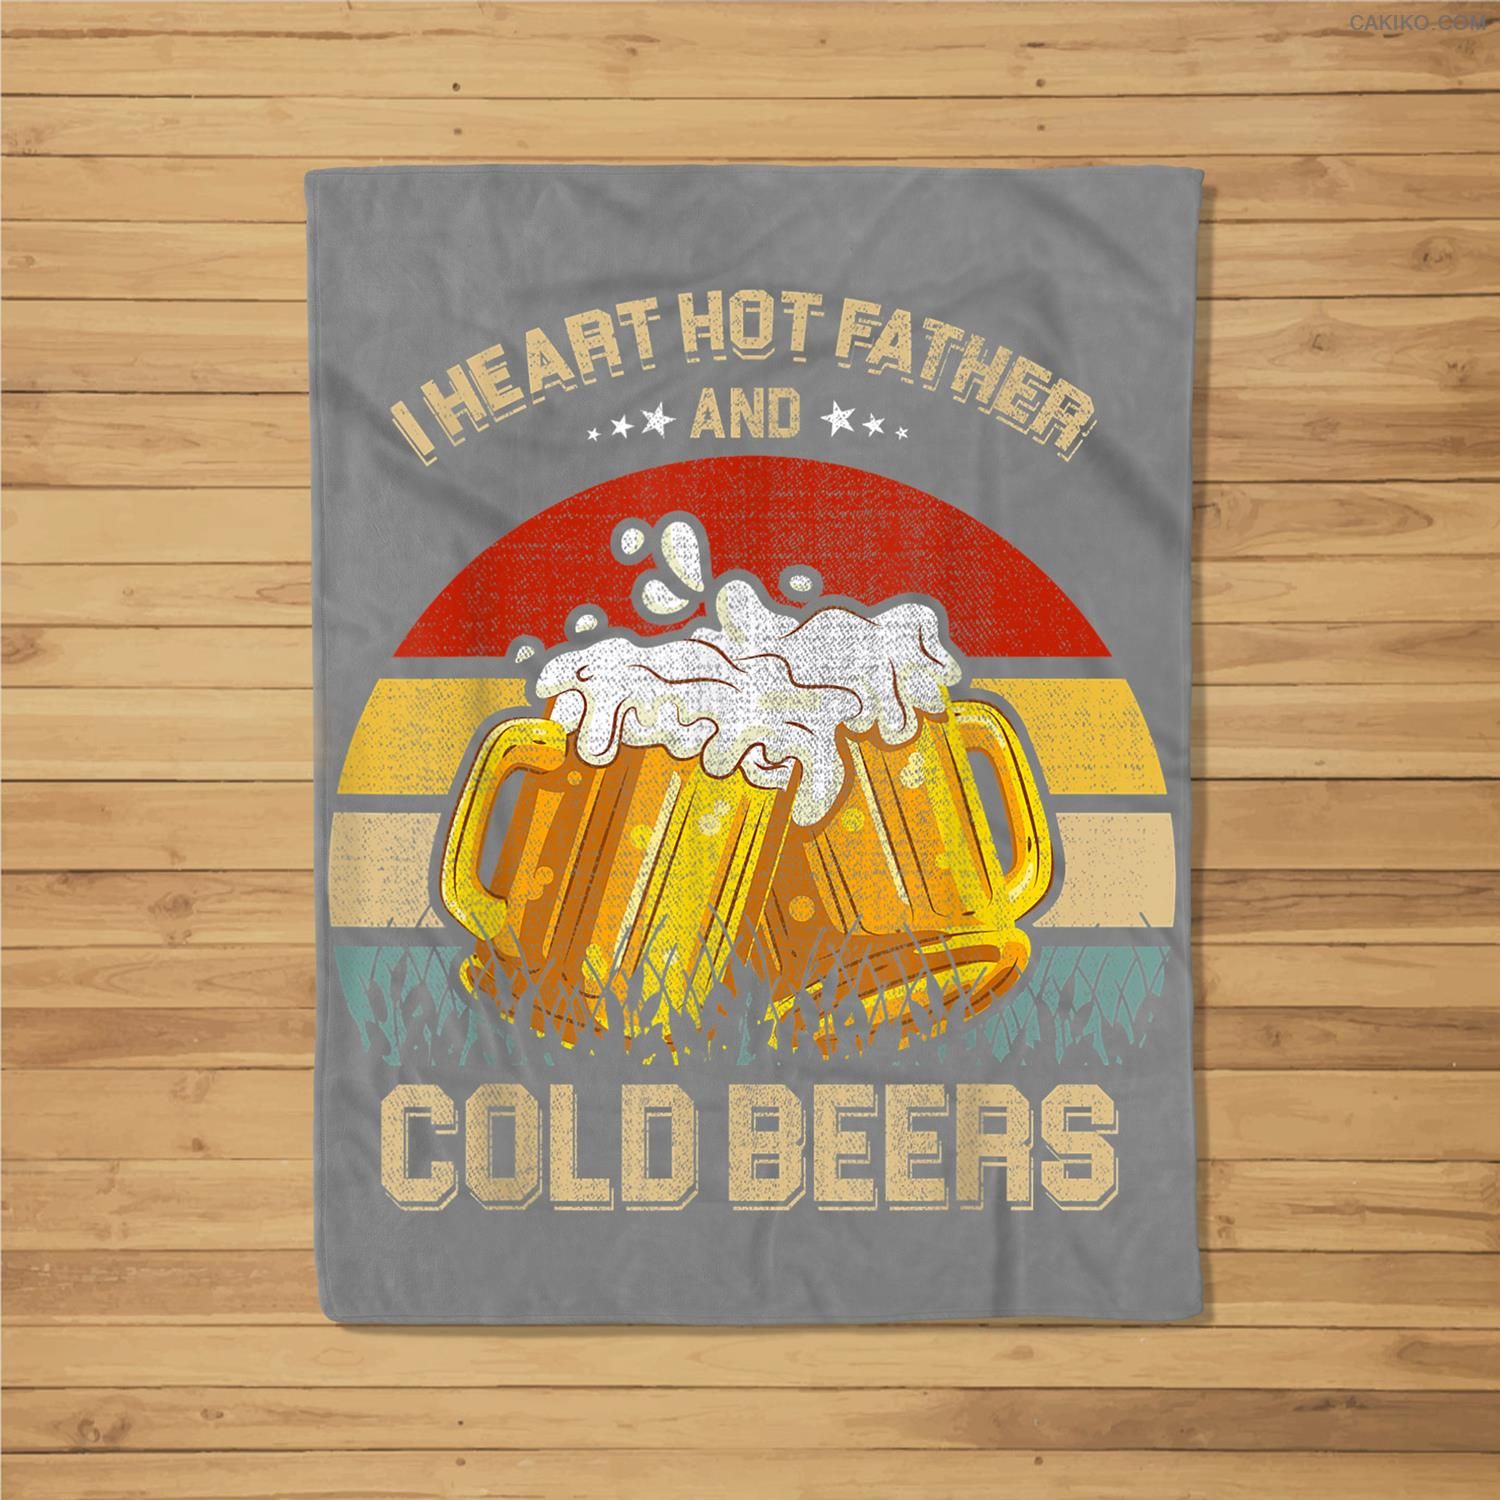 I Heard Hot Father And Cold Beer Retro Vintage Fleece Blanket